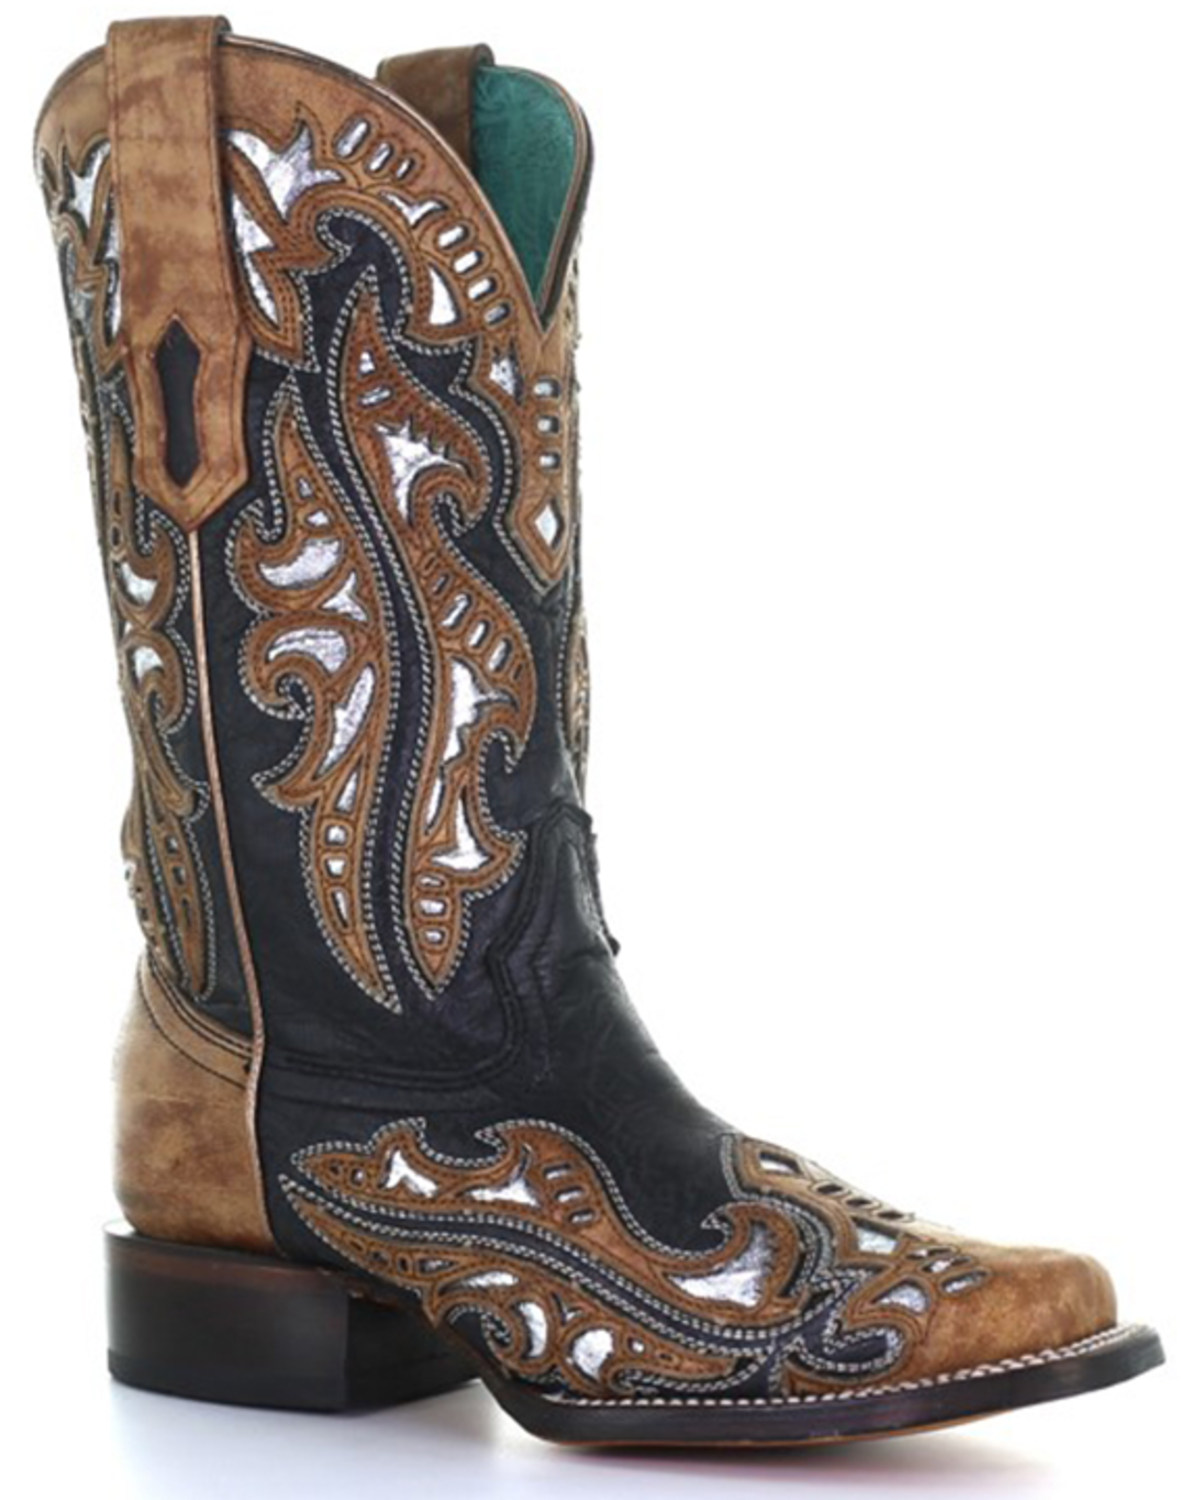 Corral Women's Metallic Inlay Embroidered Tall Western Boots - Square Toe